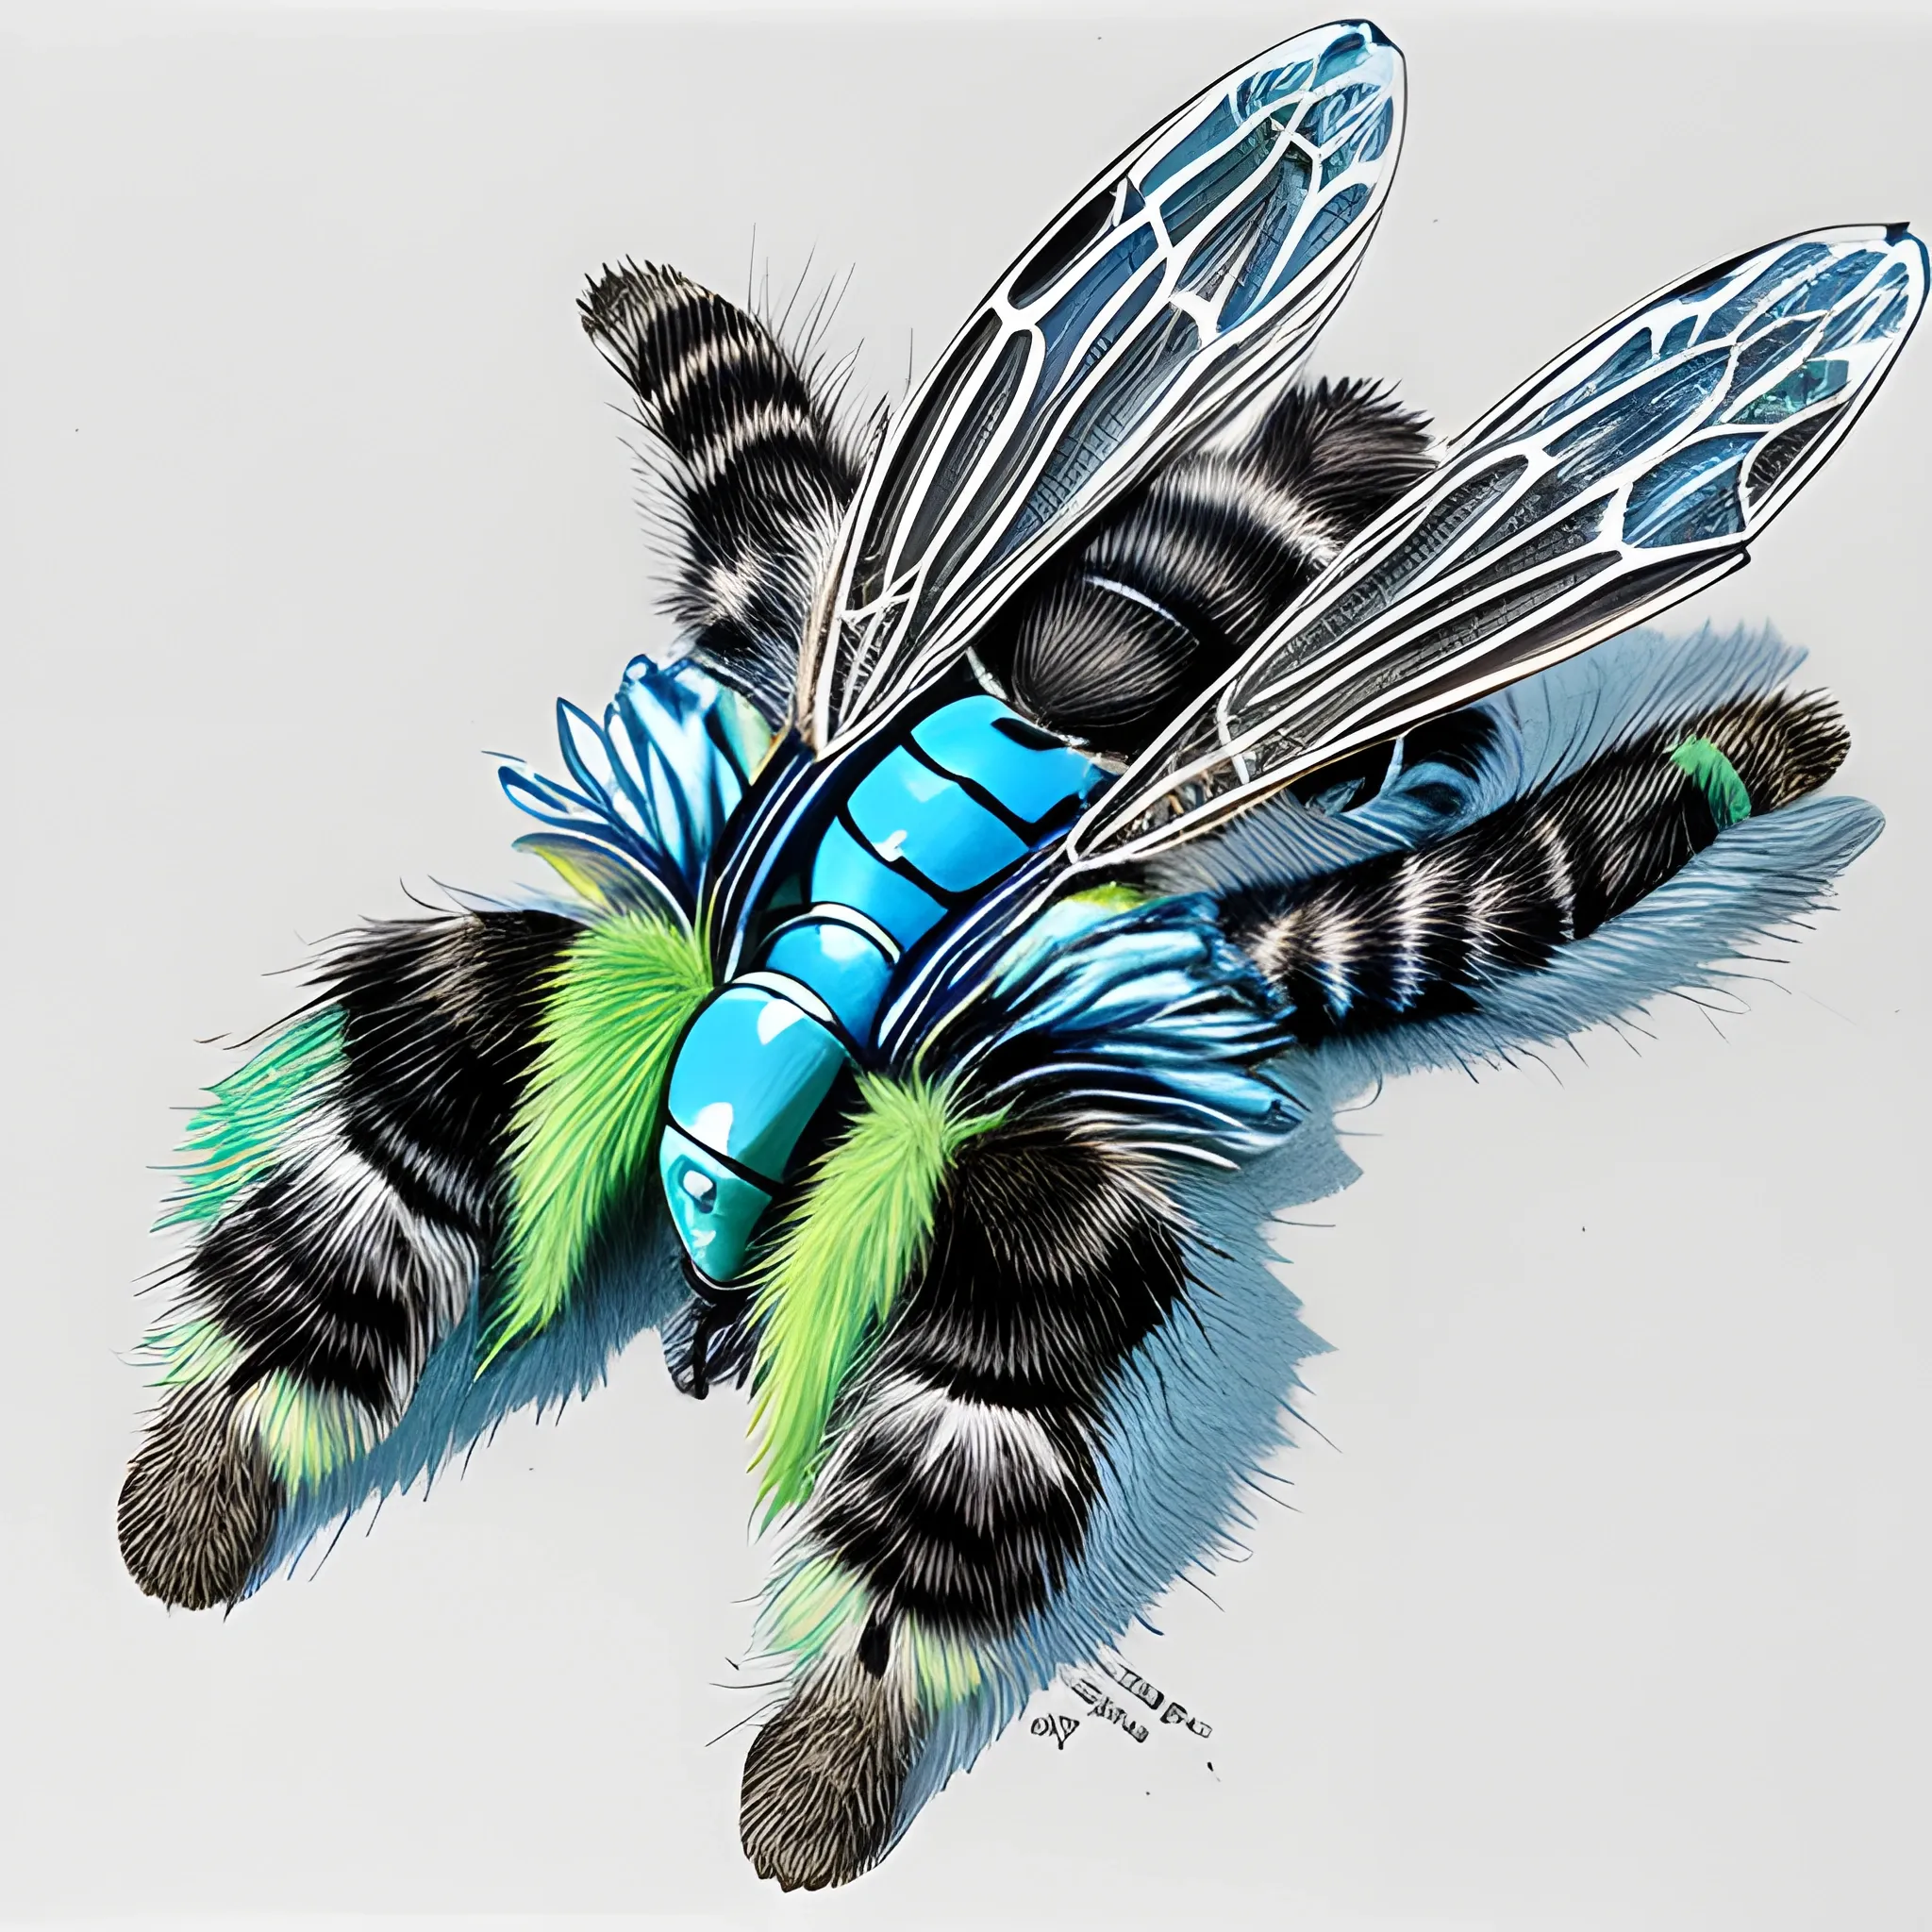 Insectile furry feline hybrid of kitten and housefly, with blue and green and white stripes, with predatory mandibles and segmented body and six jointed legs with tube feet, very detailed, Pencil Sketch